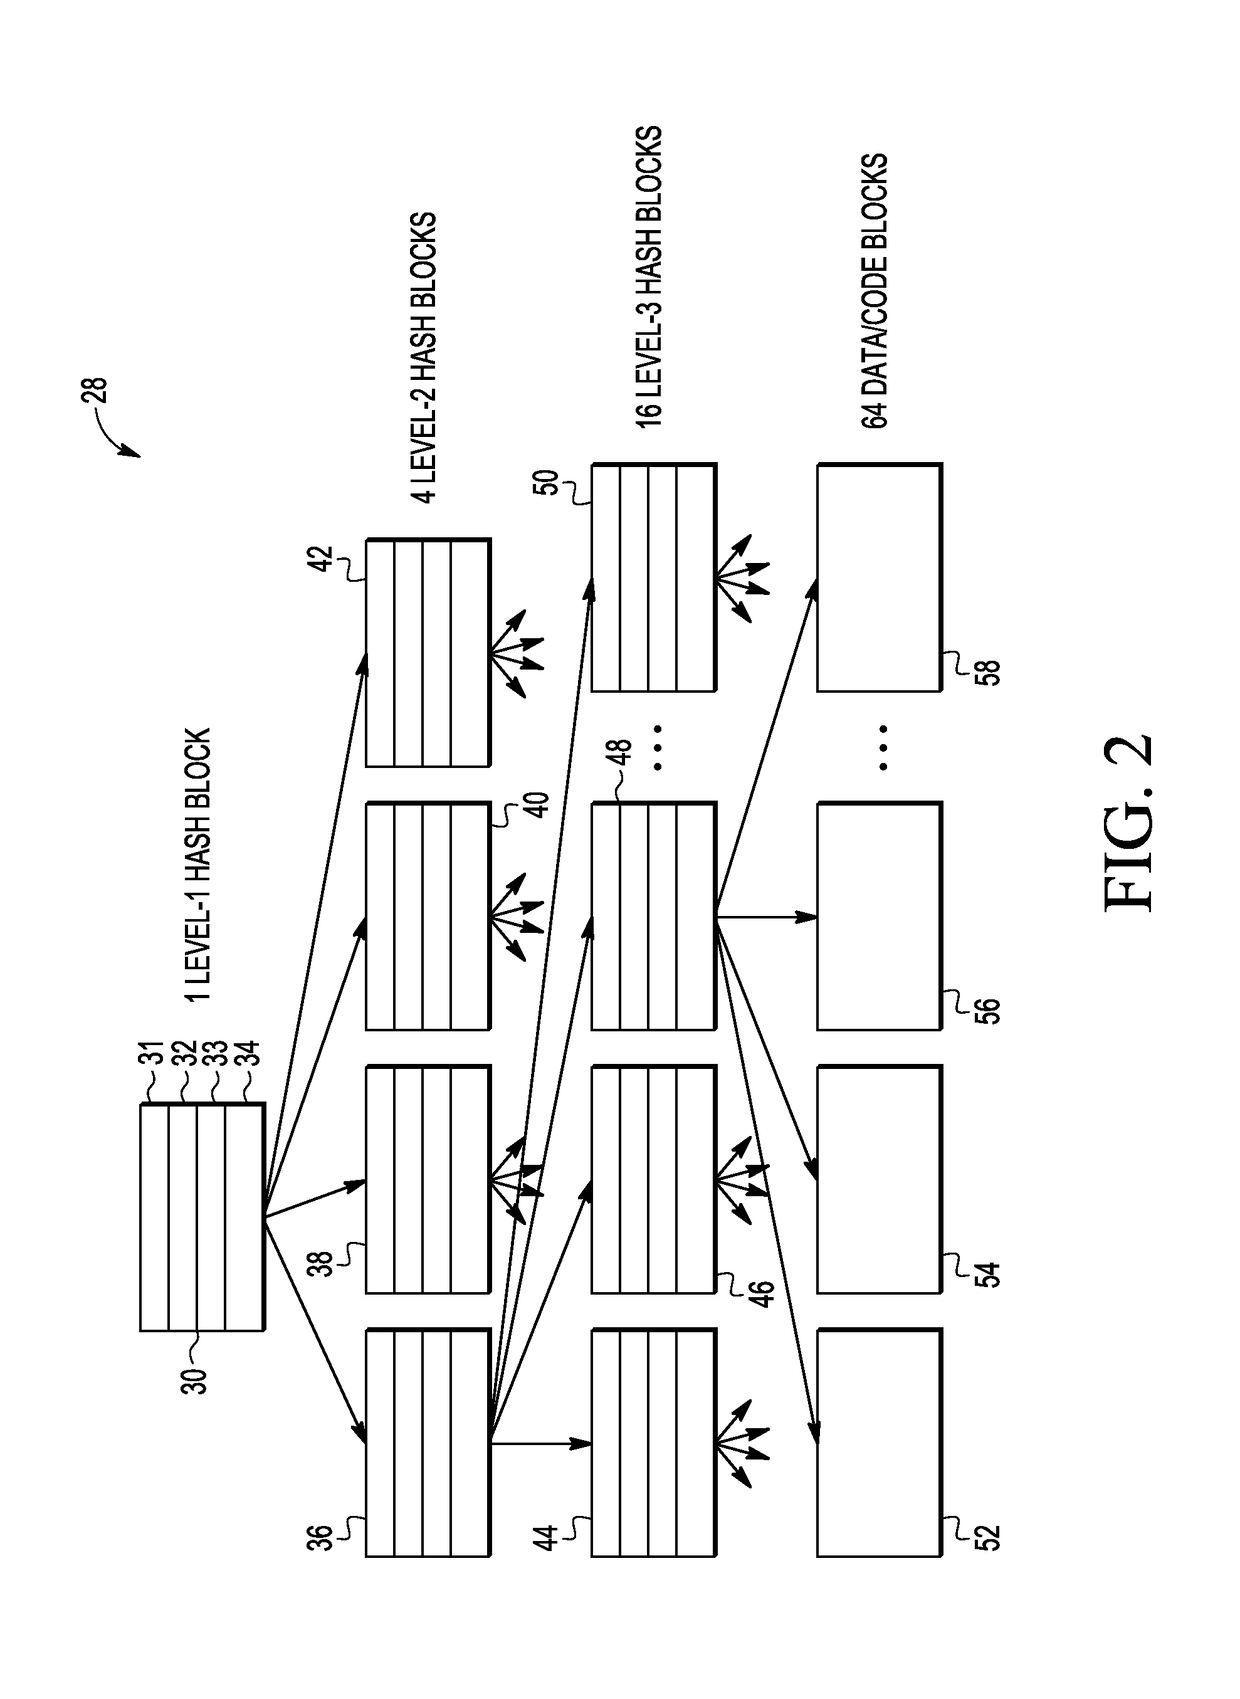 Method and system for operating a cache in a trusted execution environment